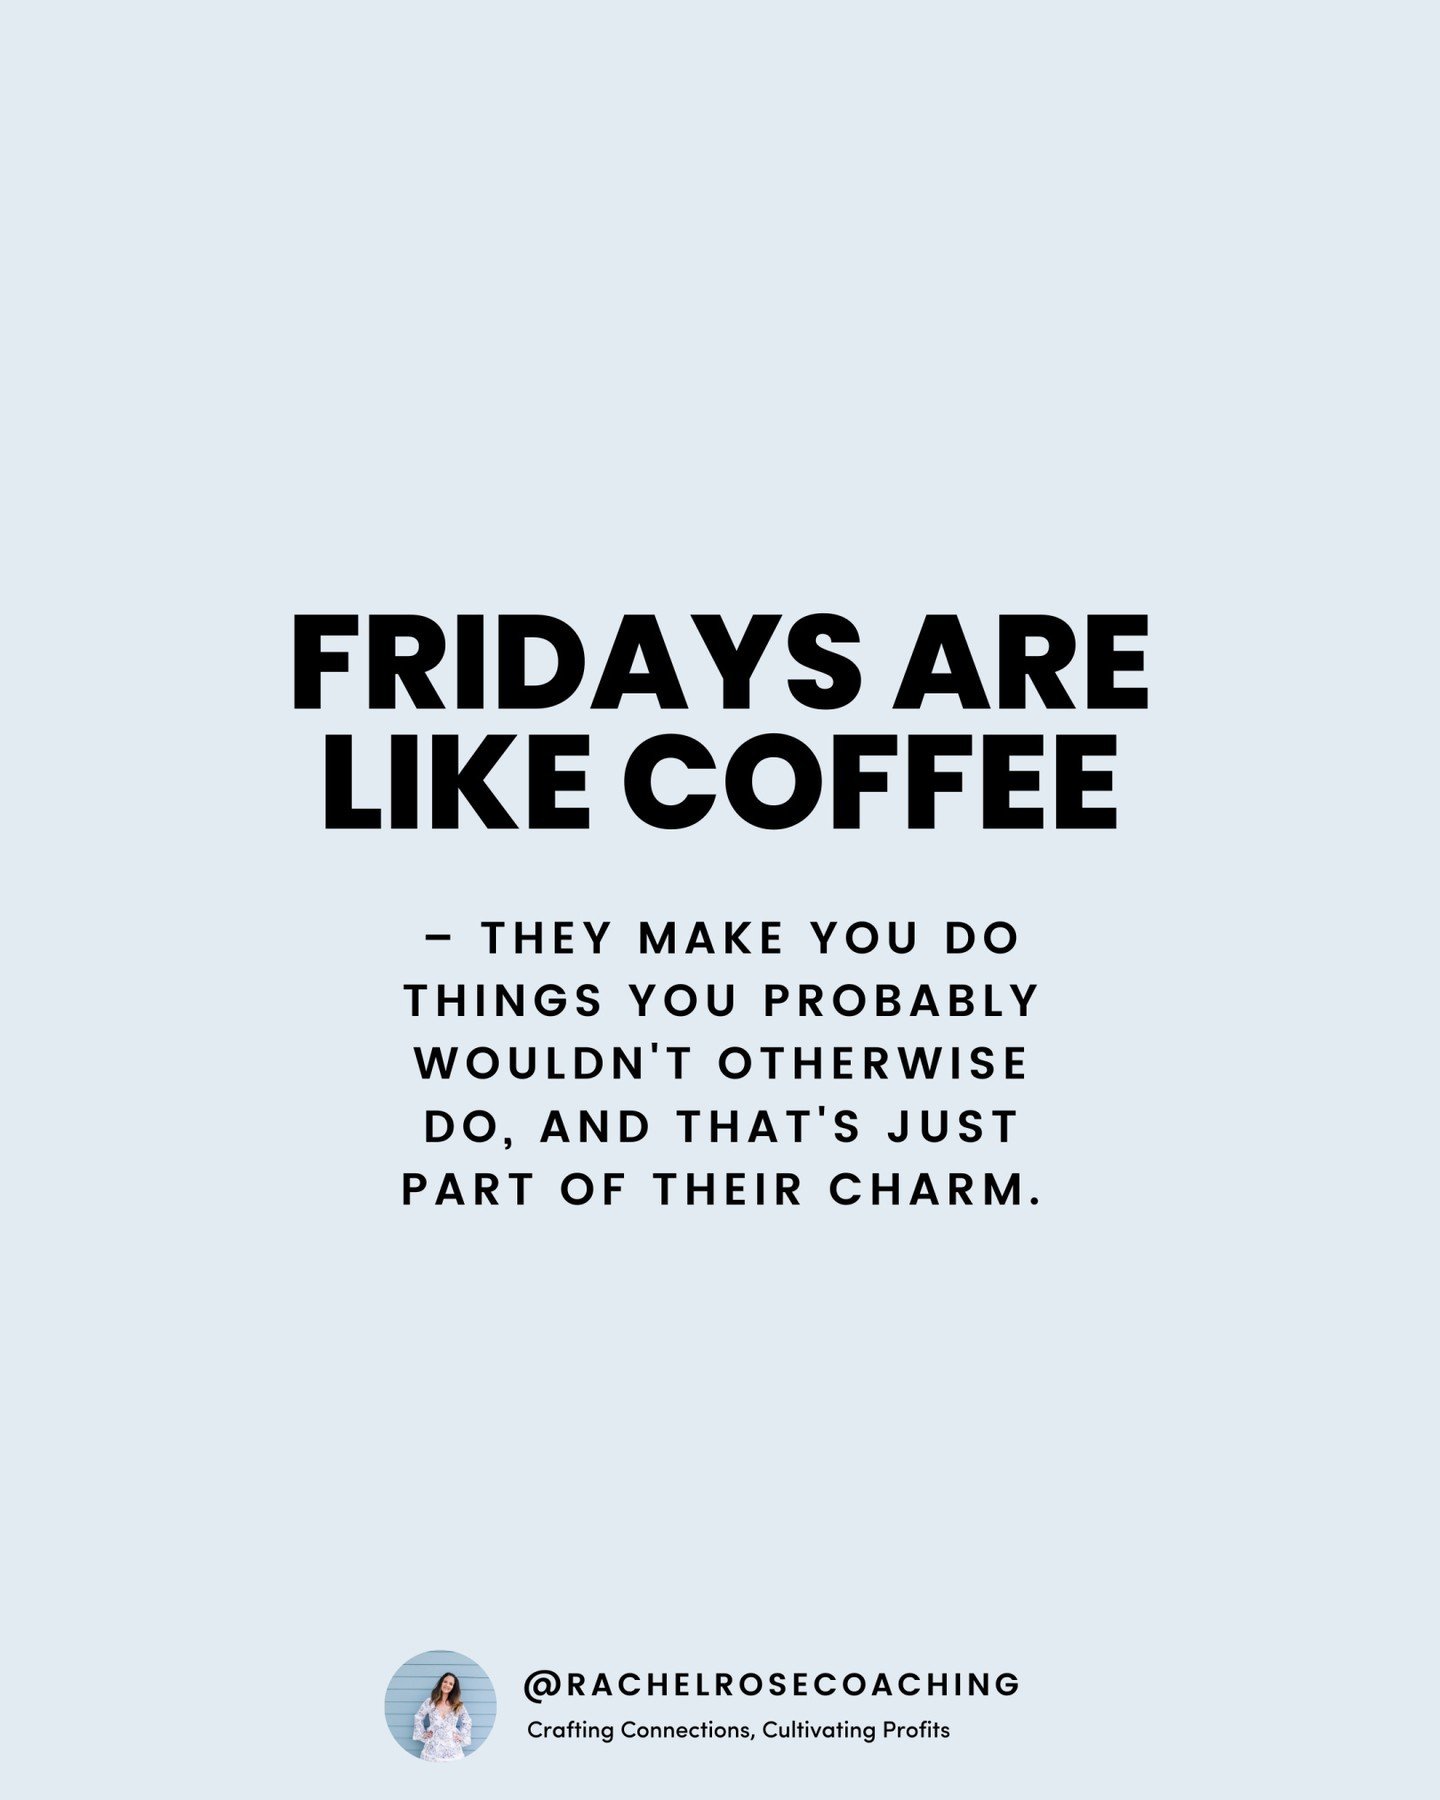 Fridays are like a perfect cup of coffee - both have that magical ability to make you do things you probably wouldn't otherwise consider. 🌟☕️ 

Whether it's the sudden urge to plan a spontaneous road trip, the inspiration to start a creative project